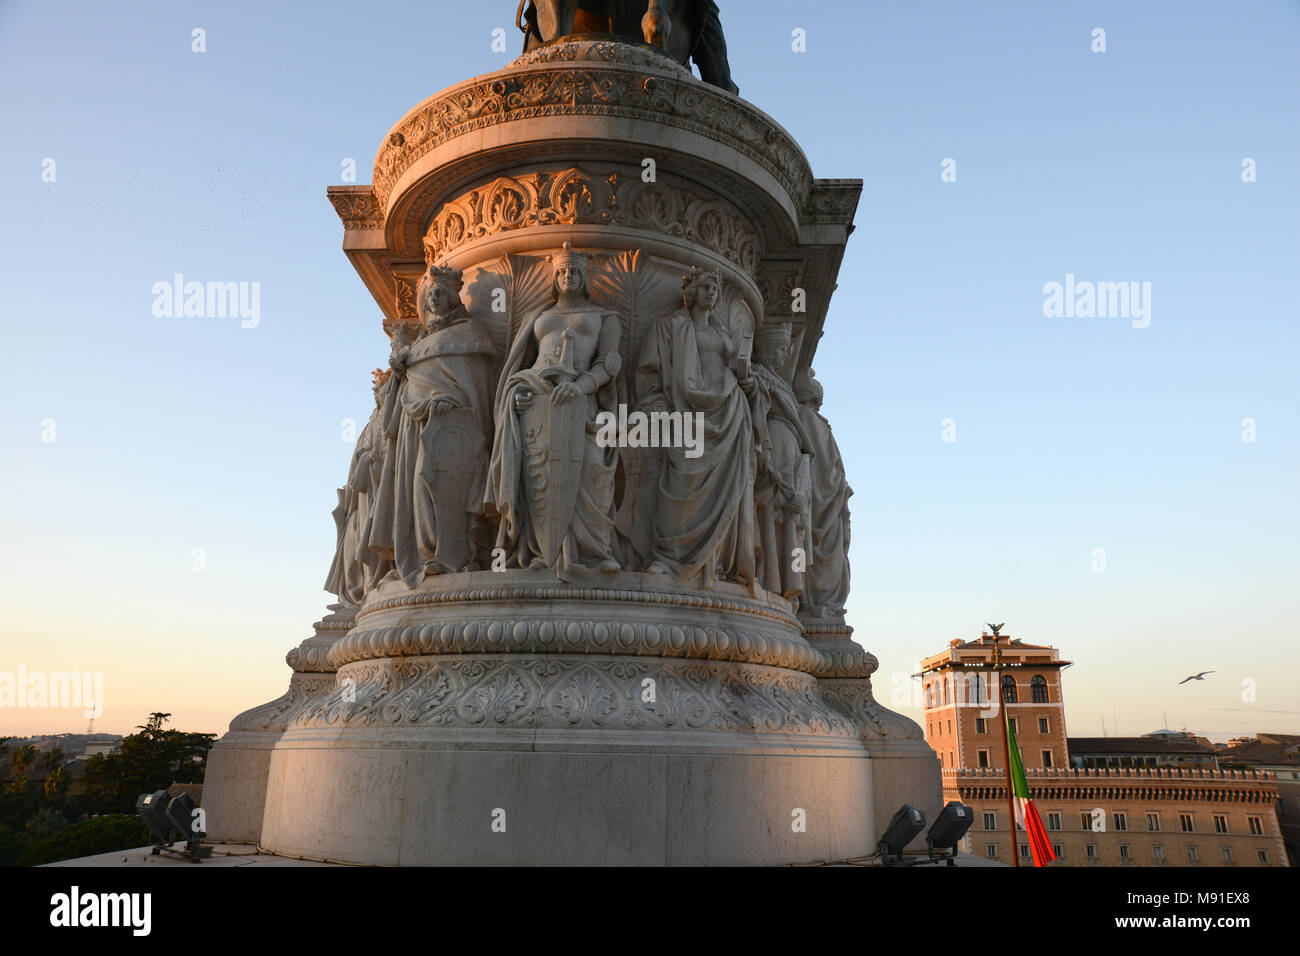 Detailed image of the carvings on the base of a monument of the Altare della Patria in Rome Italy Stock Photo